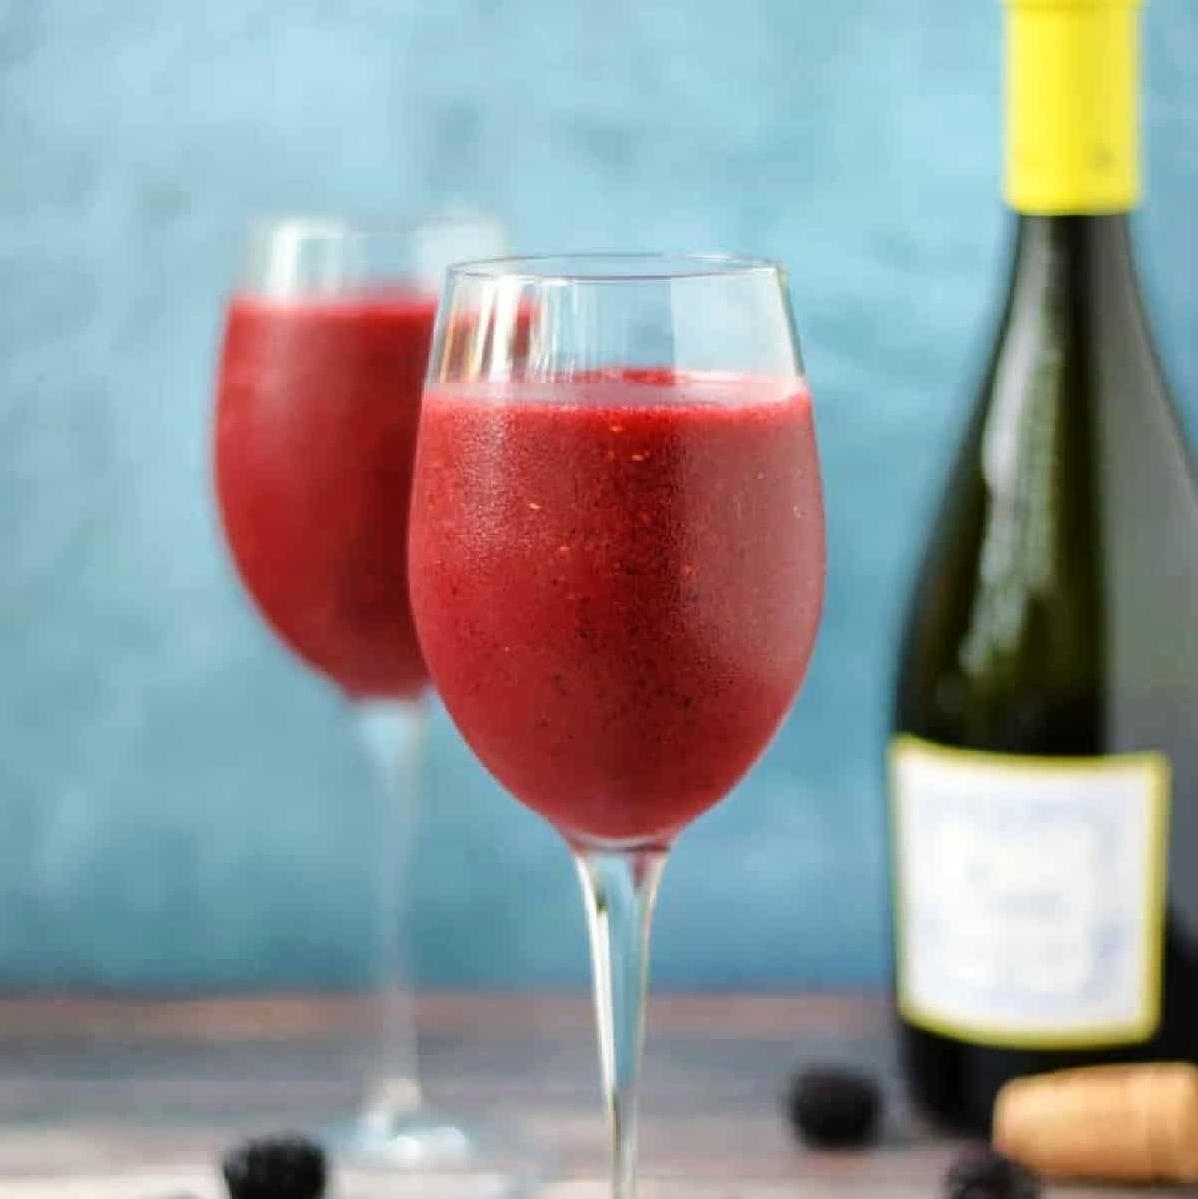  A blend of fruits and red wine makes for a delicious and nutritious treat.